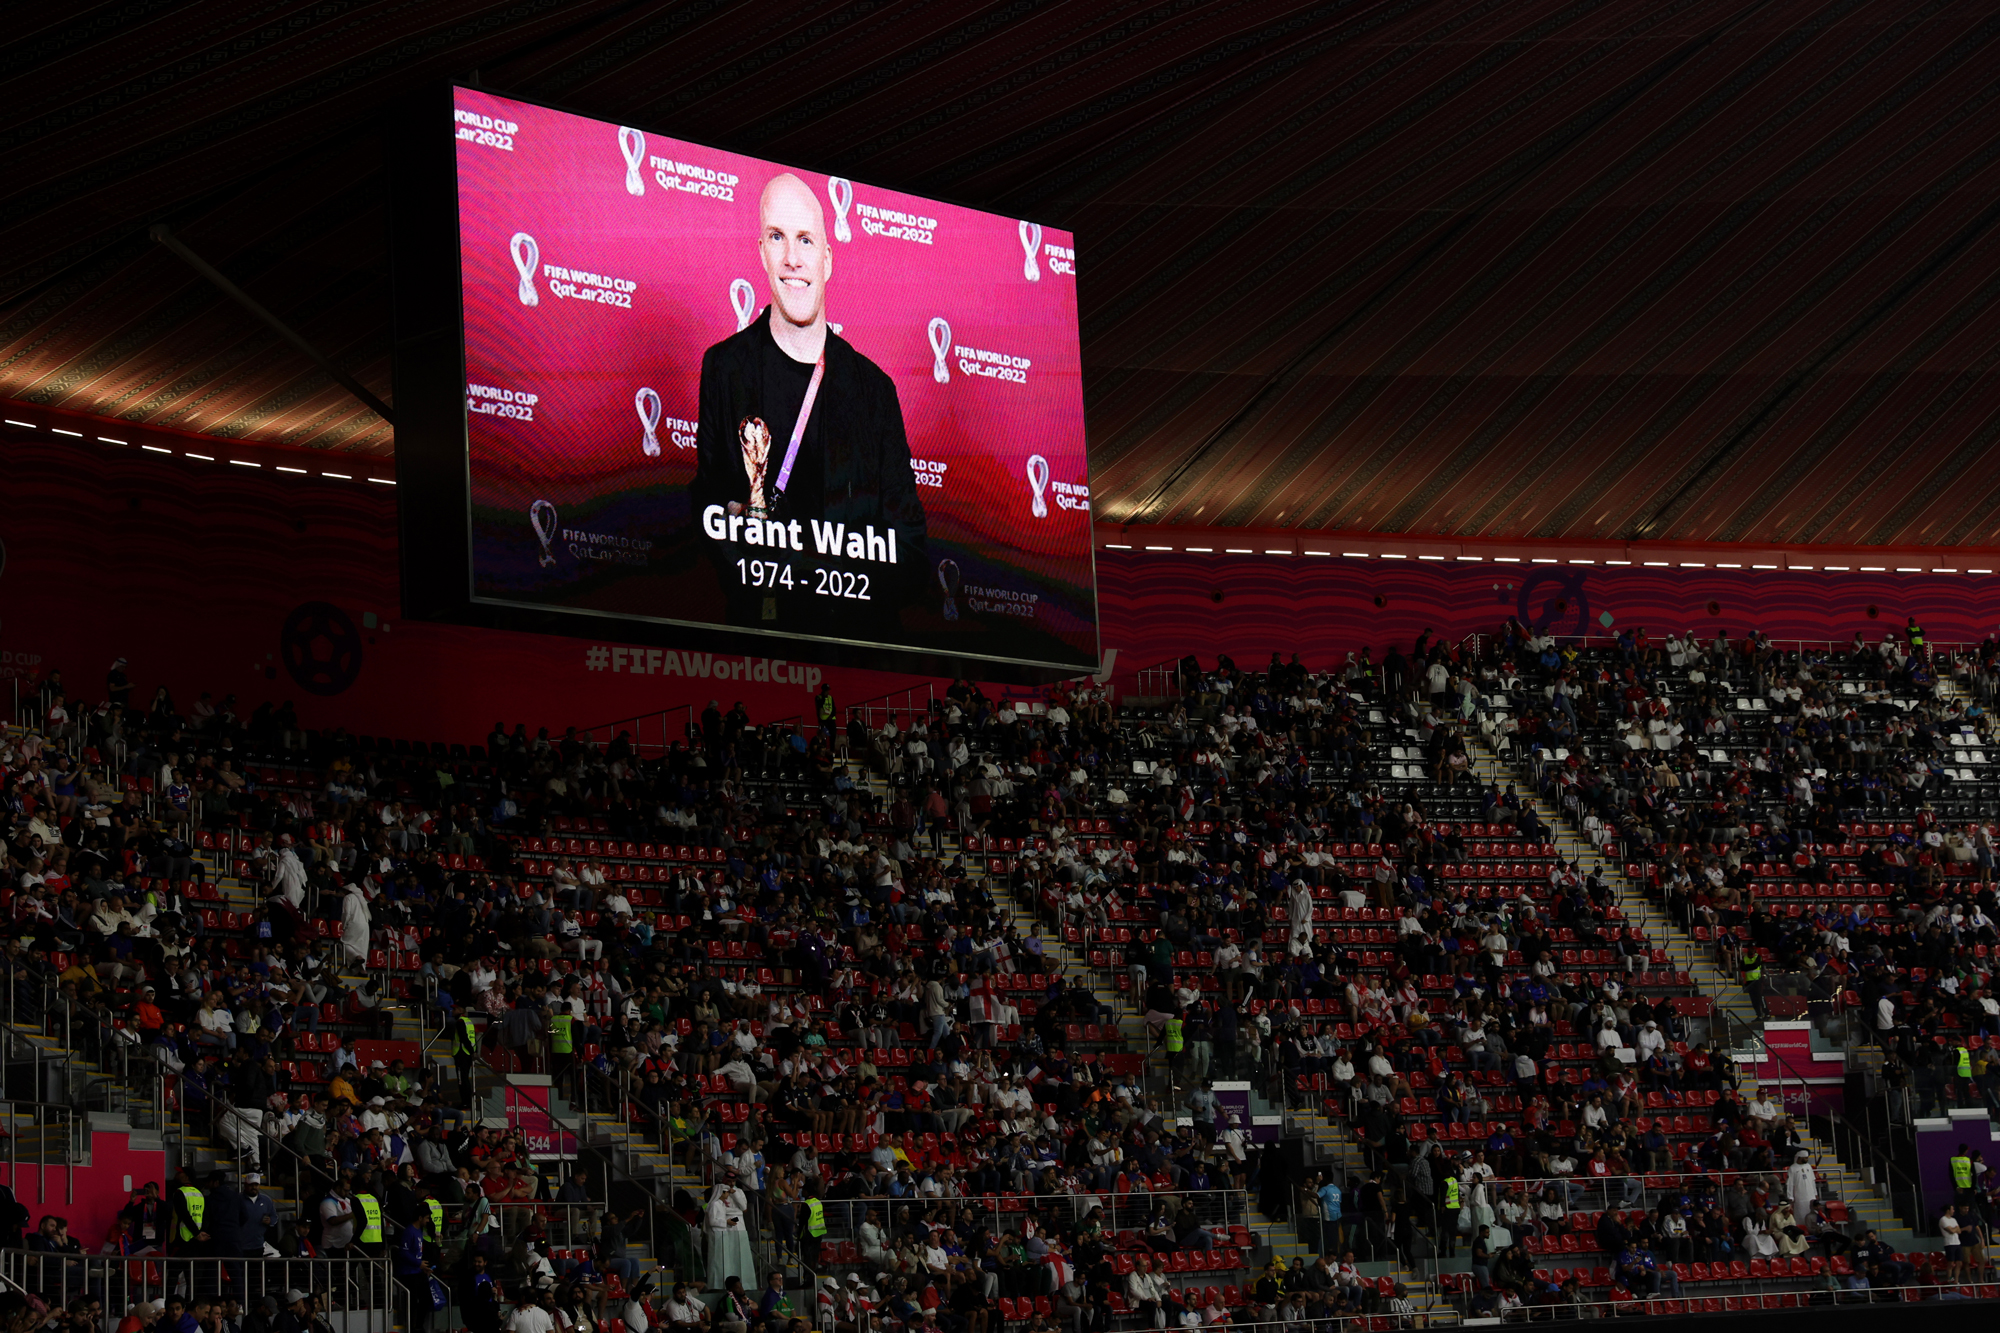 Before the England and France match, a photo of Grant Wahl is shown at Al Bayt Stadium in Al Khor, Qatar on Saturday.